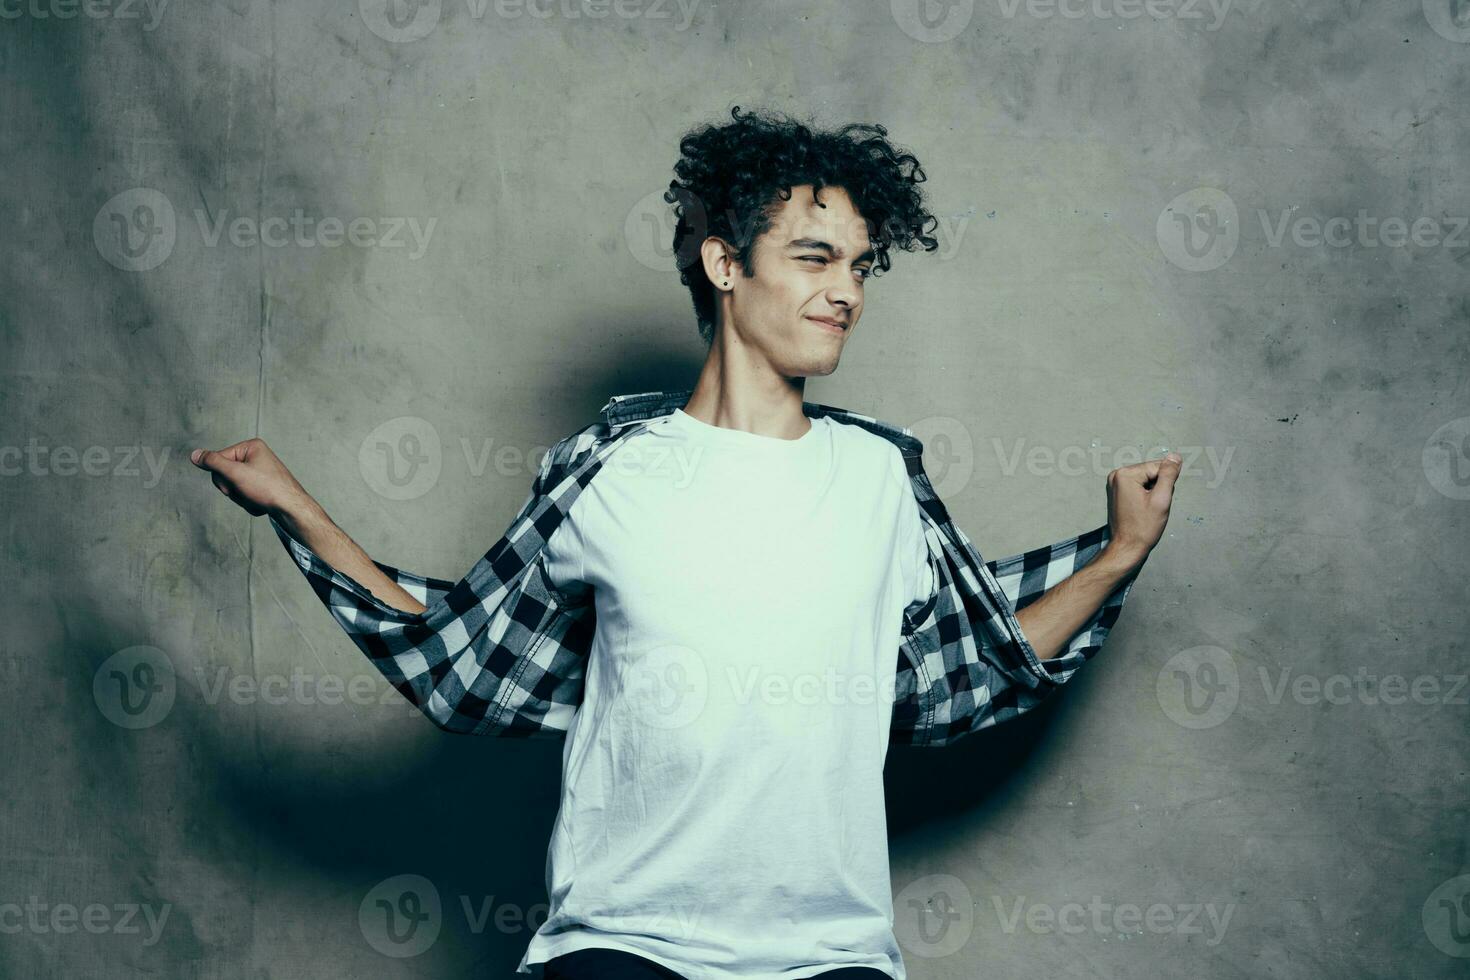 Cheerful guy curly hair plaid shirt studio cropped look lifestyle photo